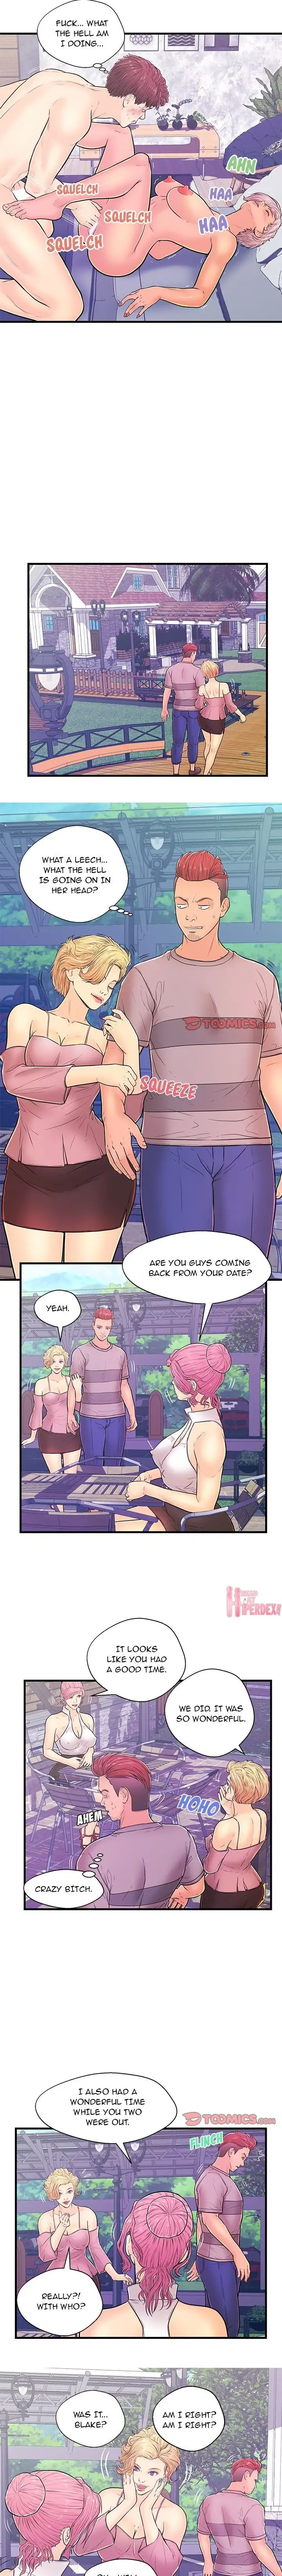 The Fling Zone - Chapter 10 Page 9